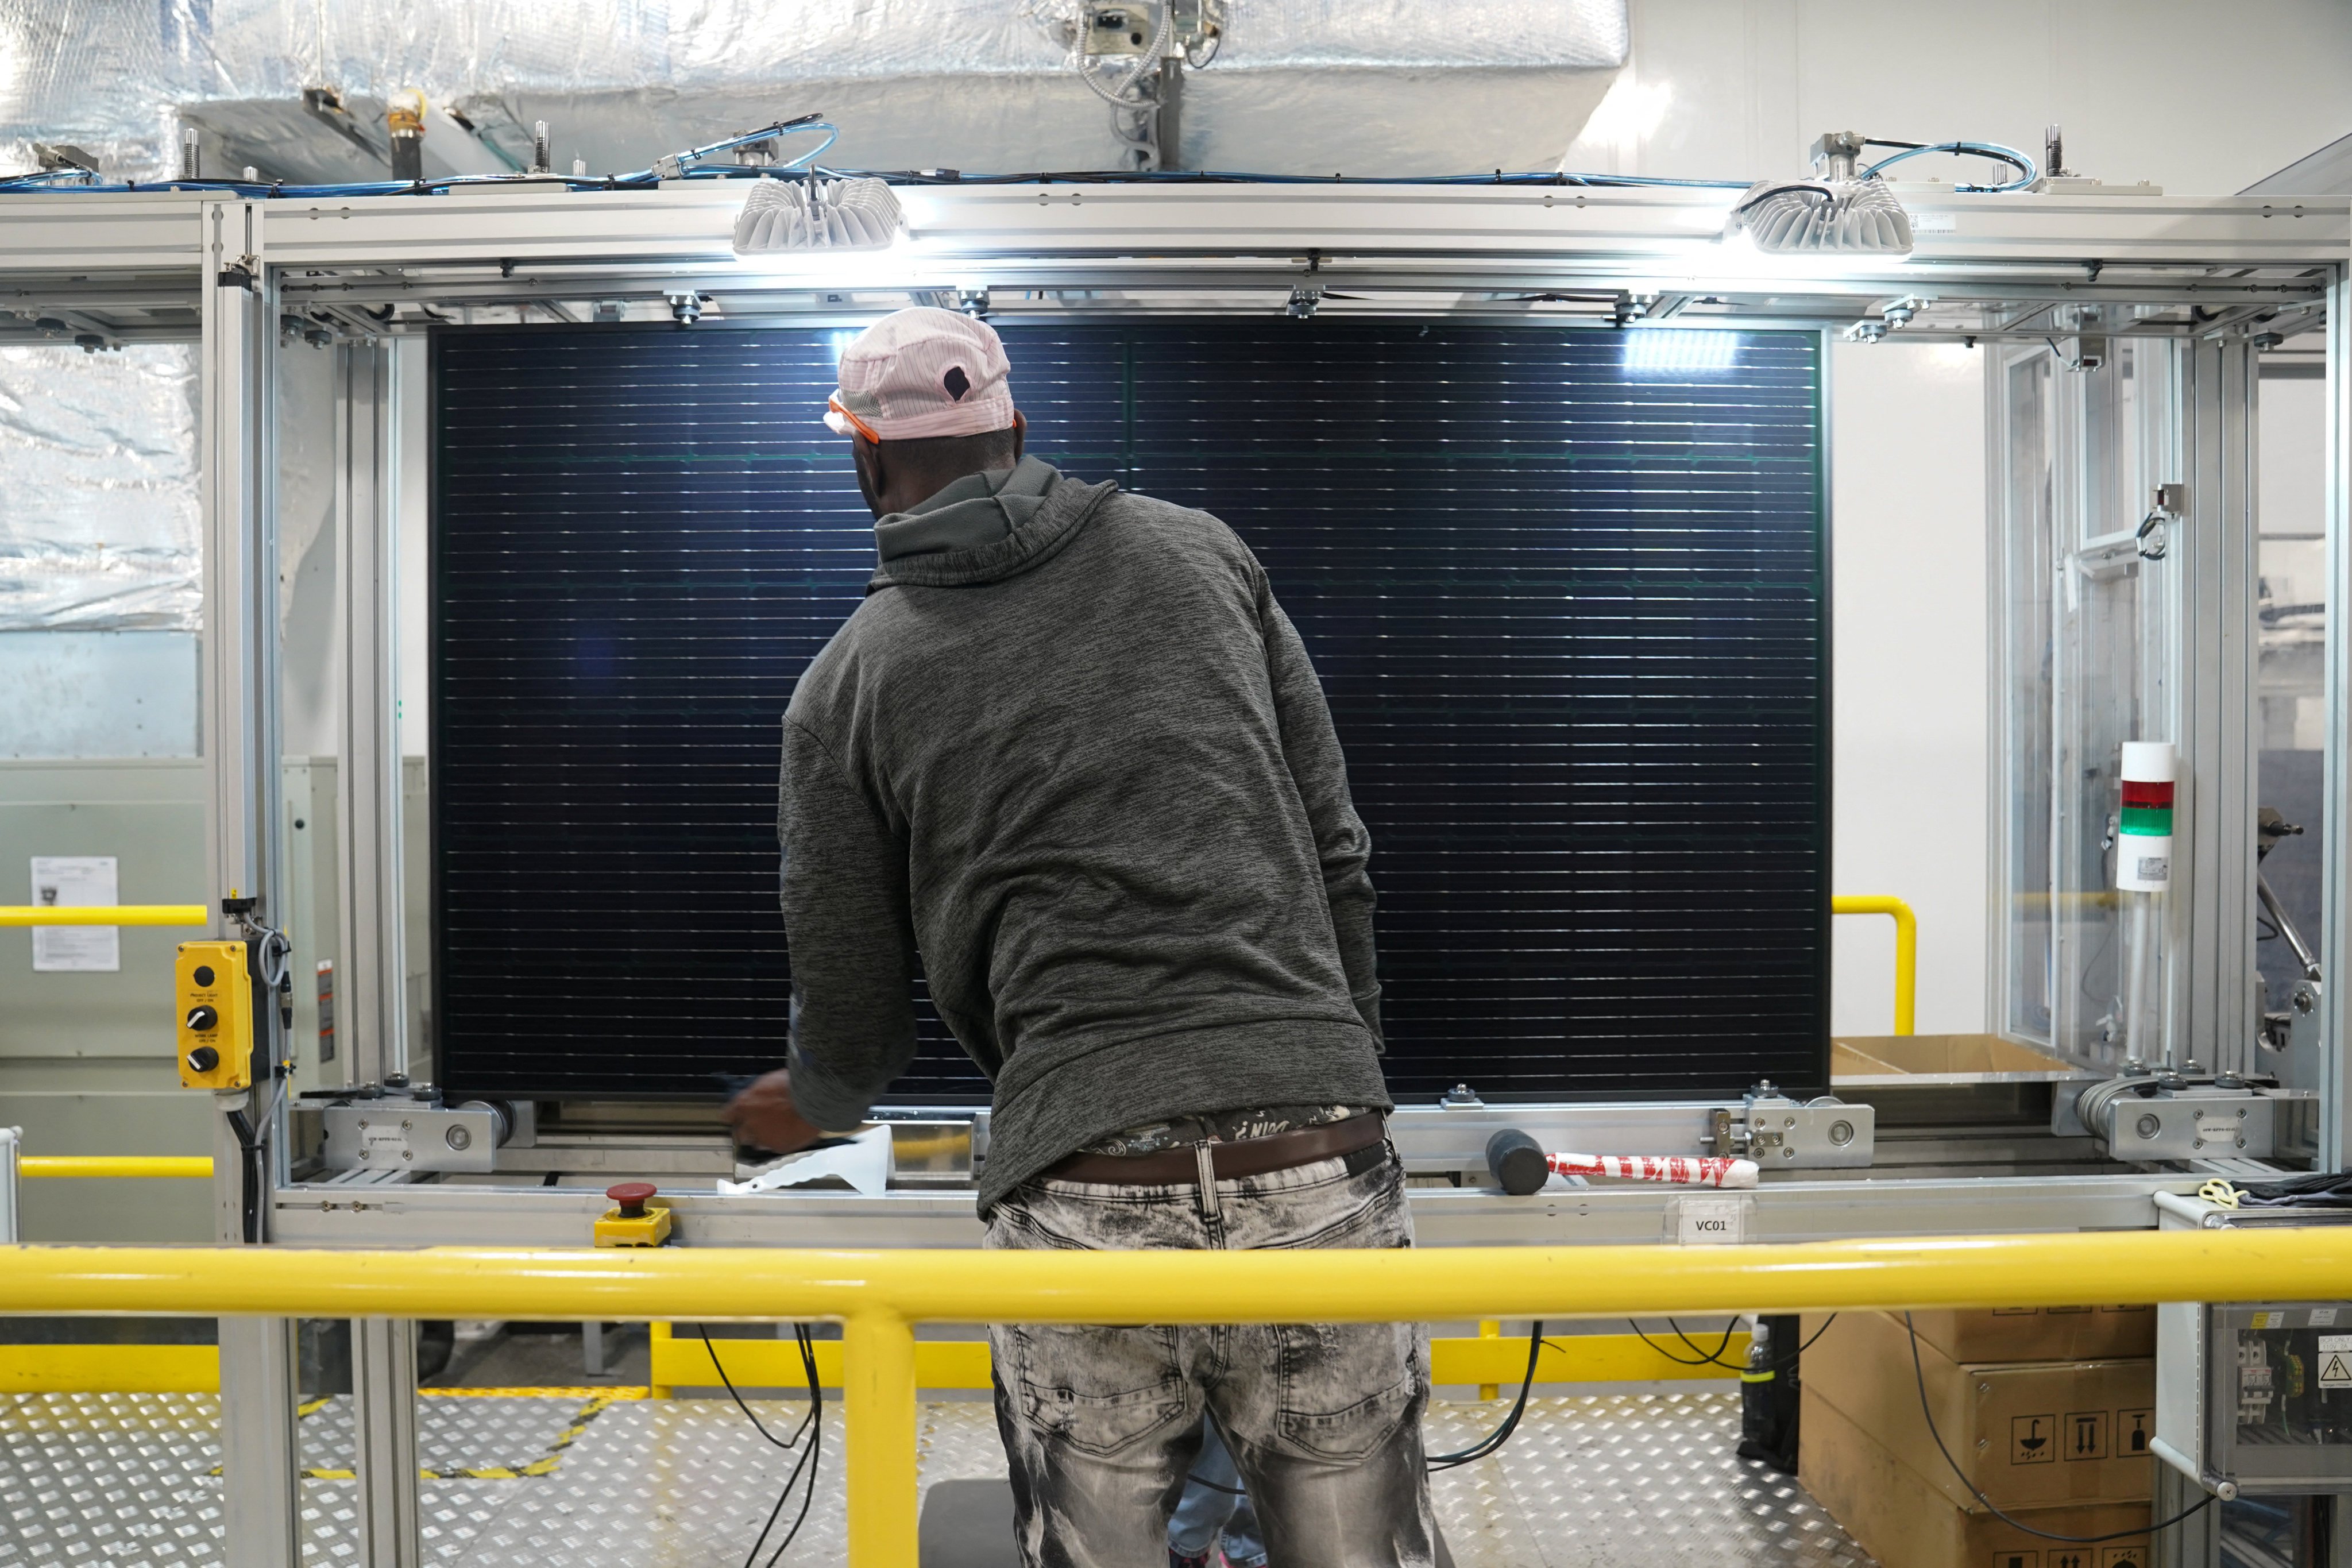 An employee works on solar panels at the QCells solar energy manufacturing plant in Dalton, Georgia, on March 2. The US industrial base has suffered from decades of decline and underinvestment, putting the country’s future economic stability at risk. Photo: Reuters